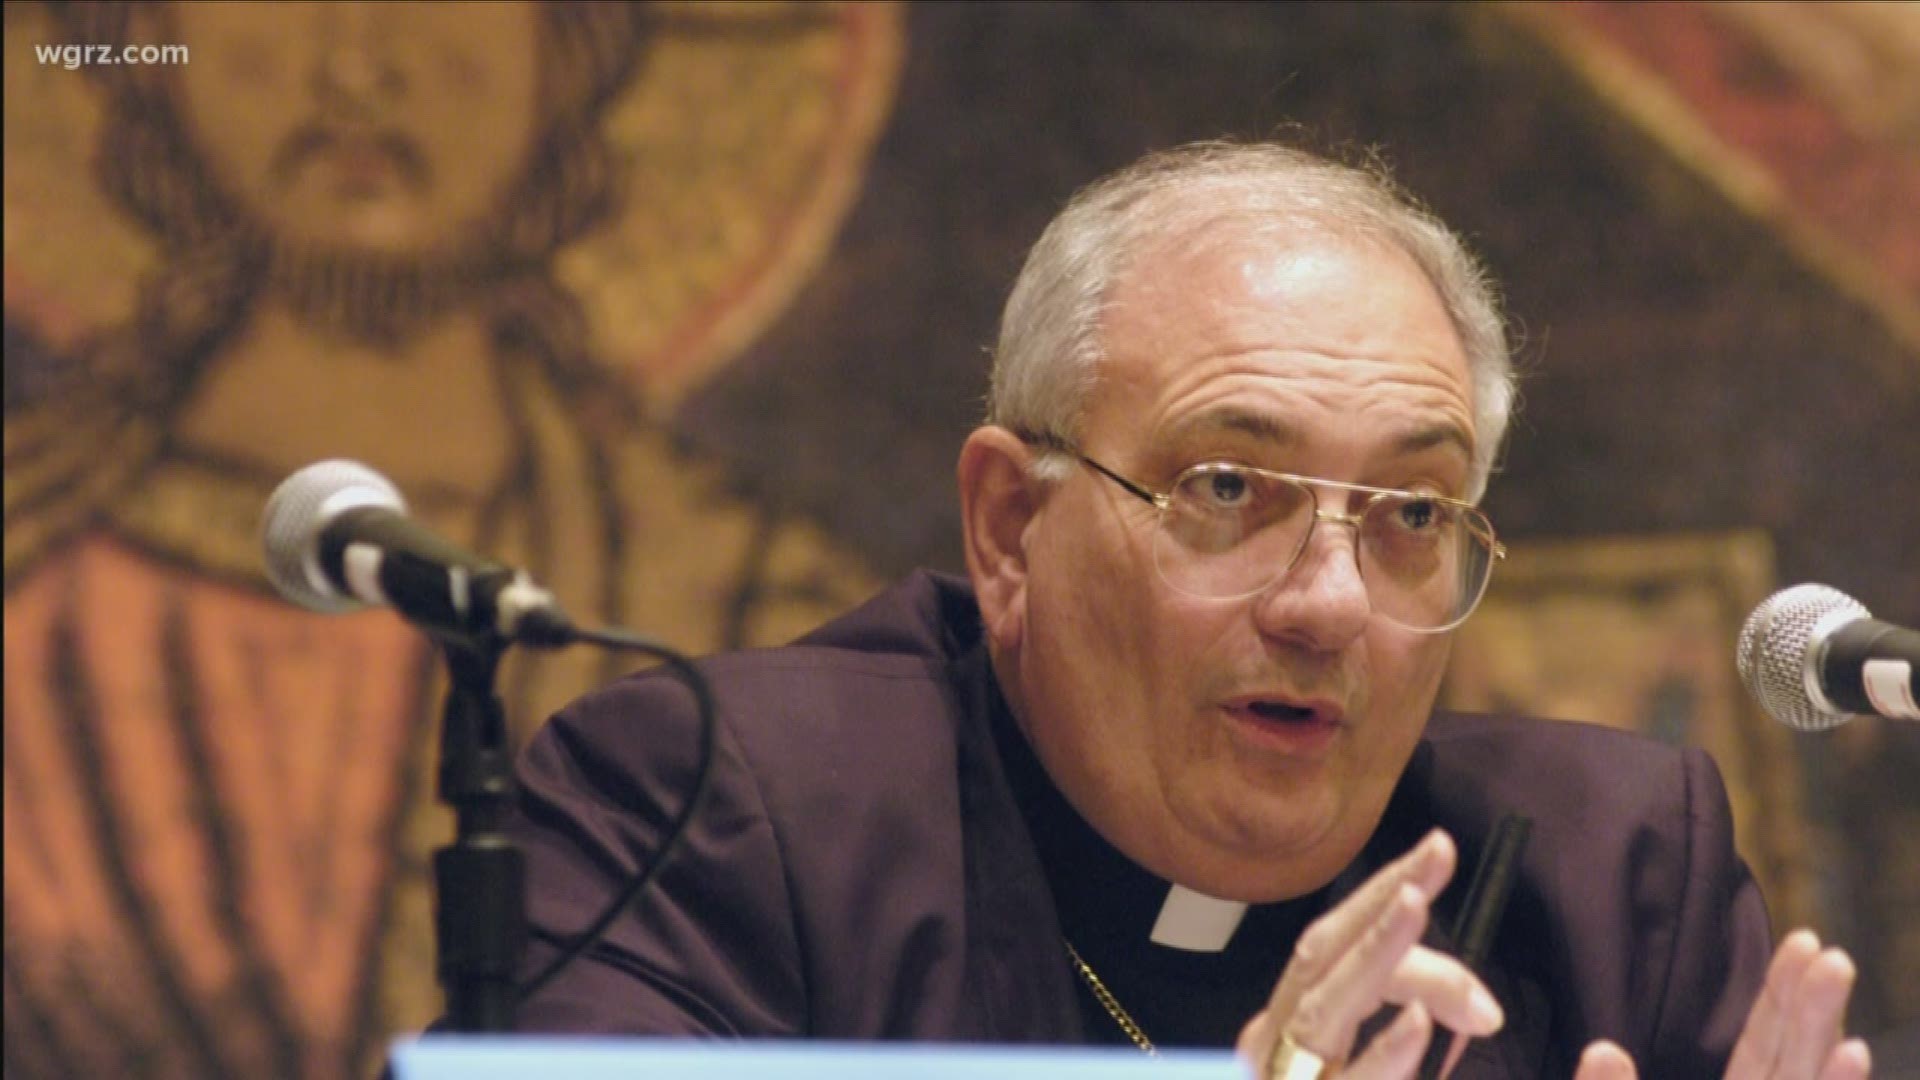 THE BROOKLYN BISHOP STANDS ACCUSED OF SEXUALLY ABUSING A MINOR BACK IN THE 19-70's...